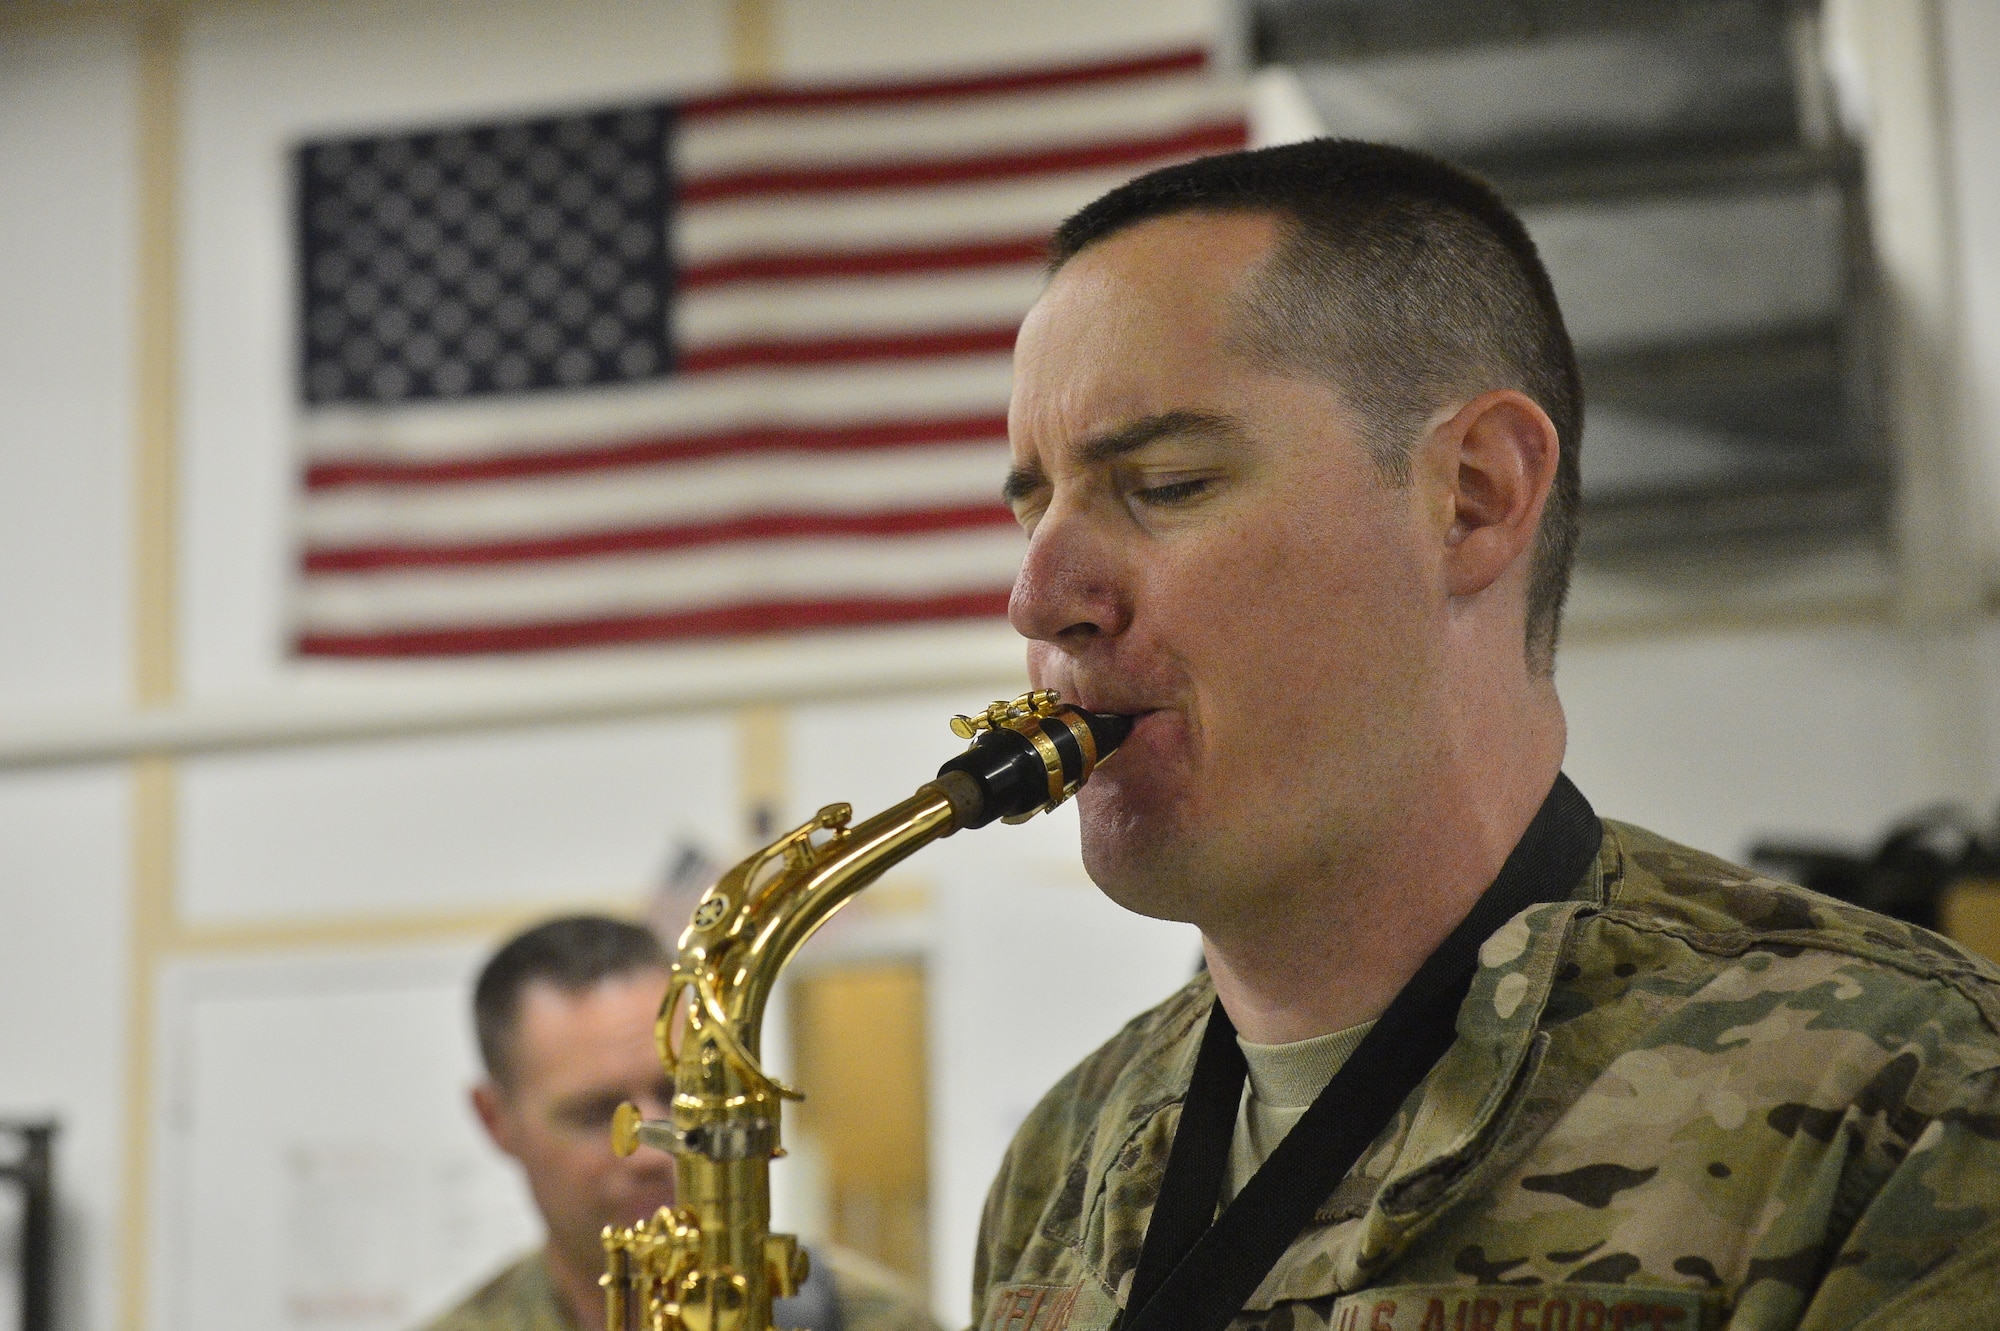 U.S. Air Force Senior Airman Gregory Pflugh solos with the U.S. Air Forces Central Command Band, Hypersonic, in a performance for the 455 Expeditionary Aeromedical Evacuation Squadron at Bagram Air Base April 11, 2014. The performance was a display of gratitude for the men and women of the 455 EAES and the work they do saving lives throughout the region. (U.S. Air Force photo/Staff Sgt. Vernon Young)